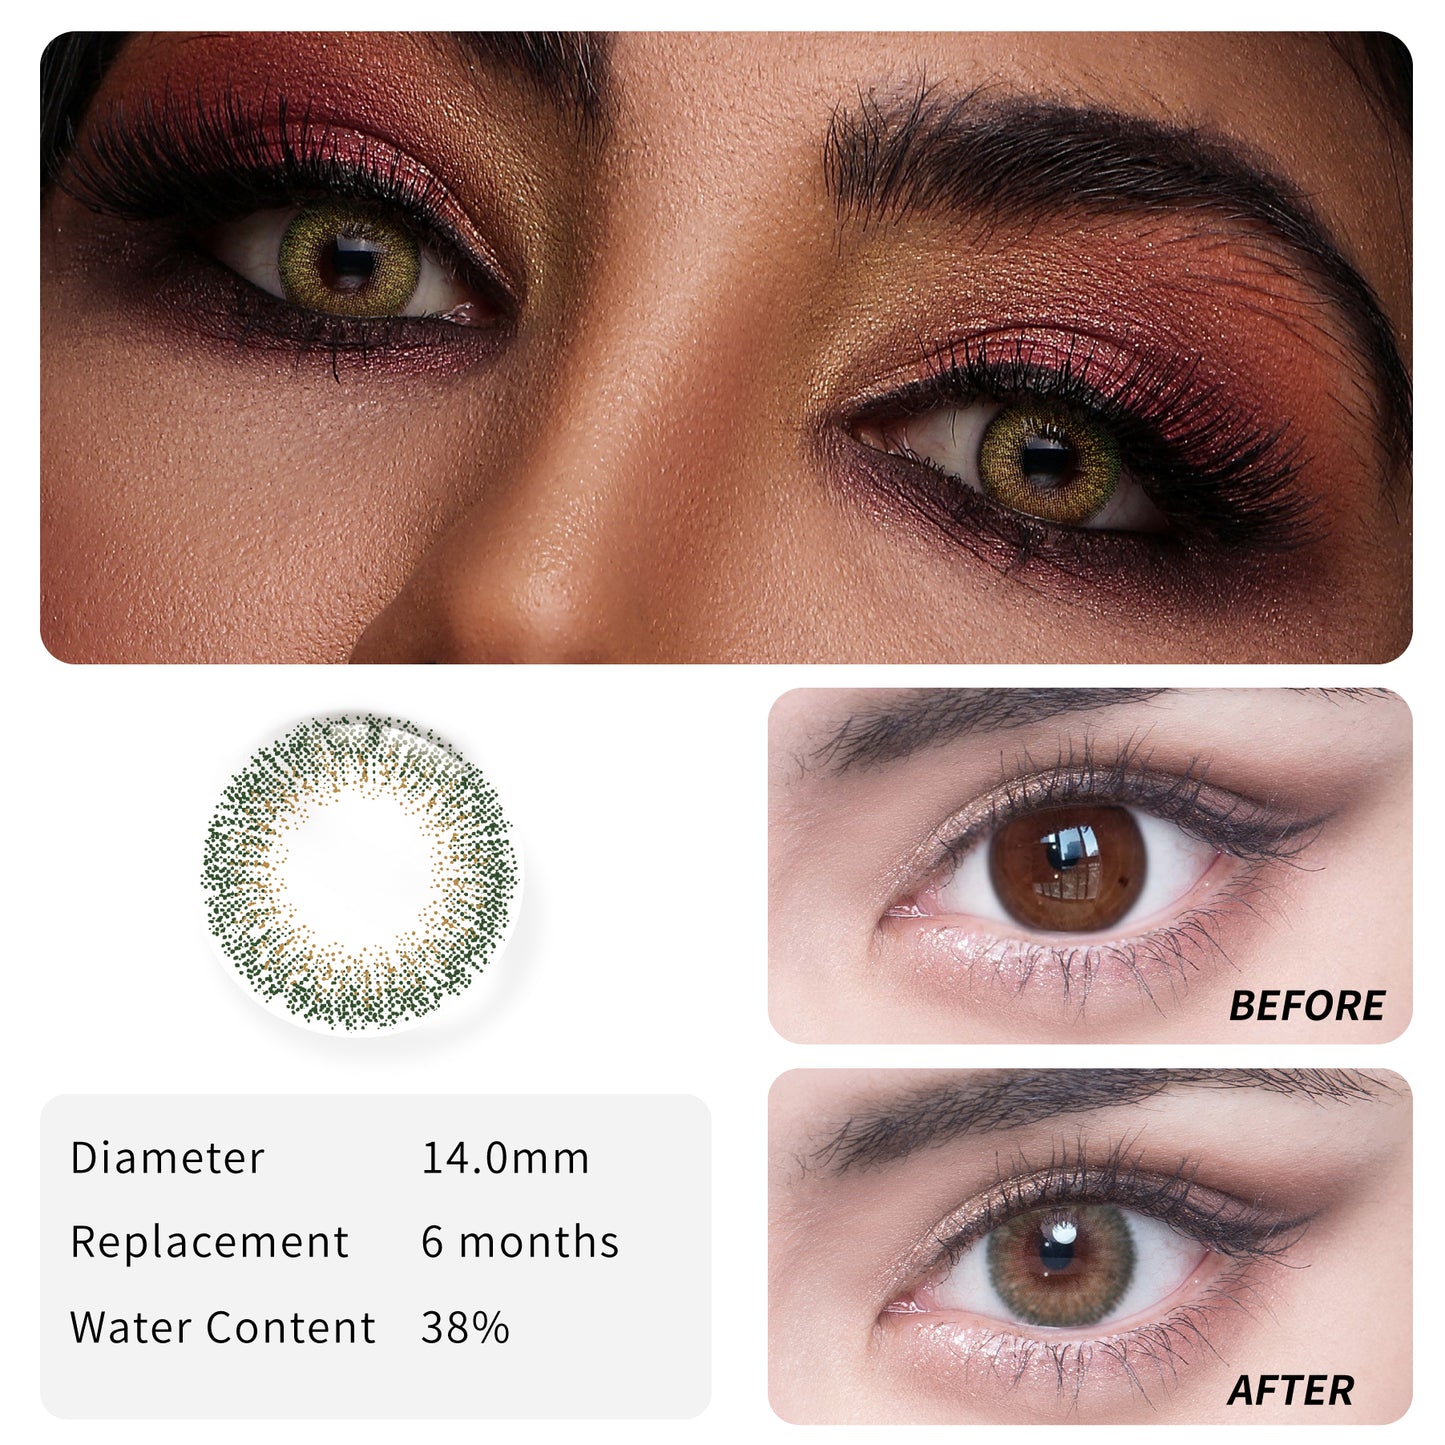  1Pcs FDA Certificate Eyes Colorful Contact Lenses - BABYSBREATH GREEN